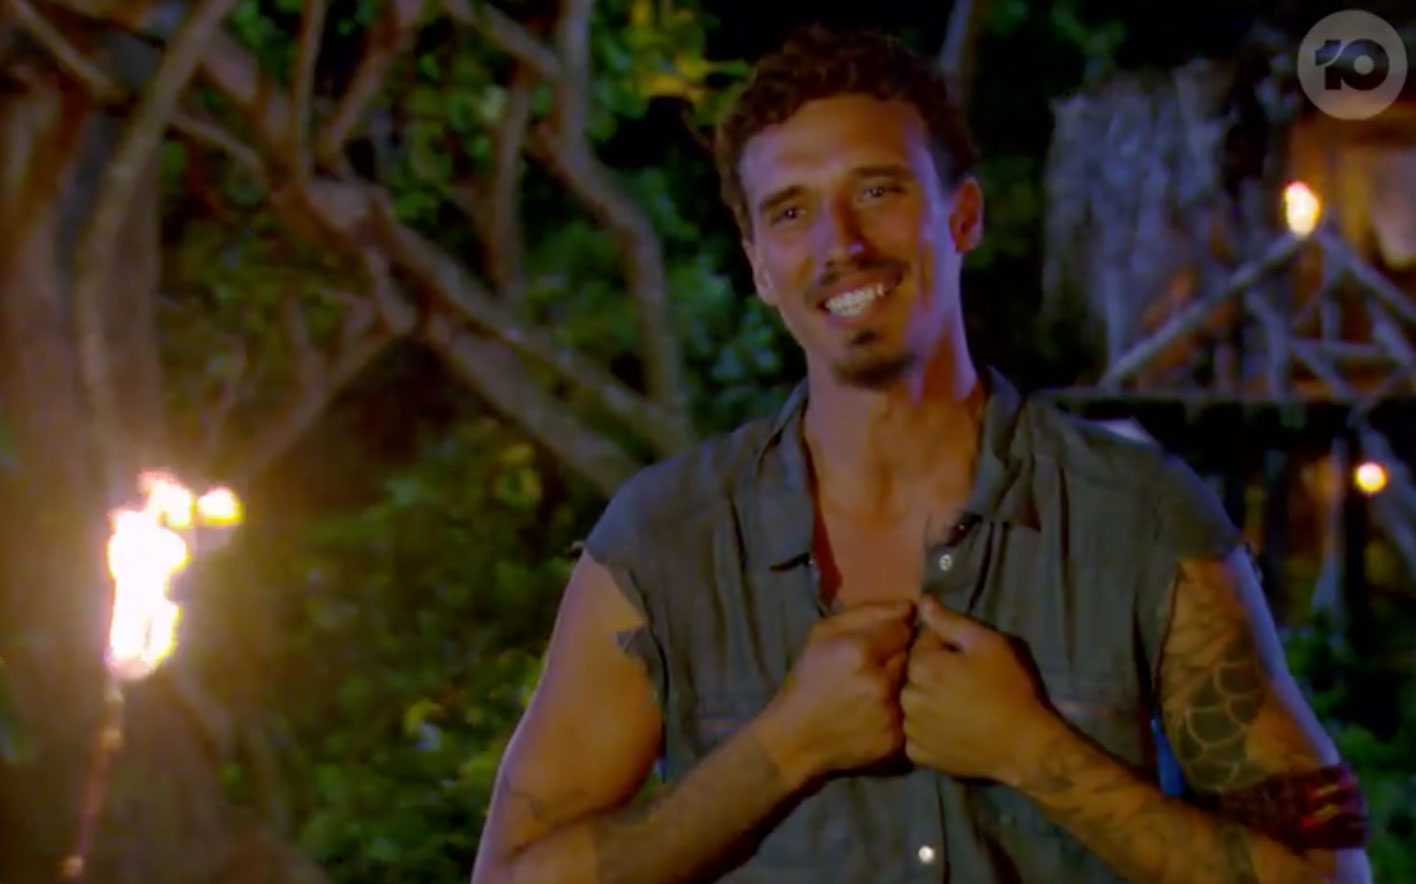 That Crowdfunding Campaign For ‘Survivor’ Fave Luke Has Now Hit Over $100K In Donations